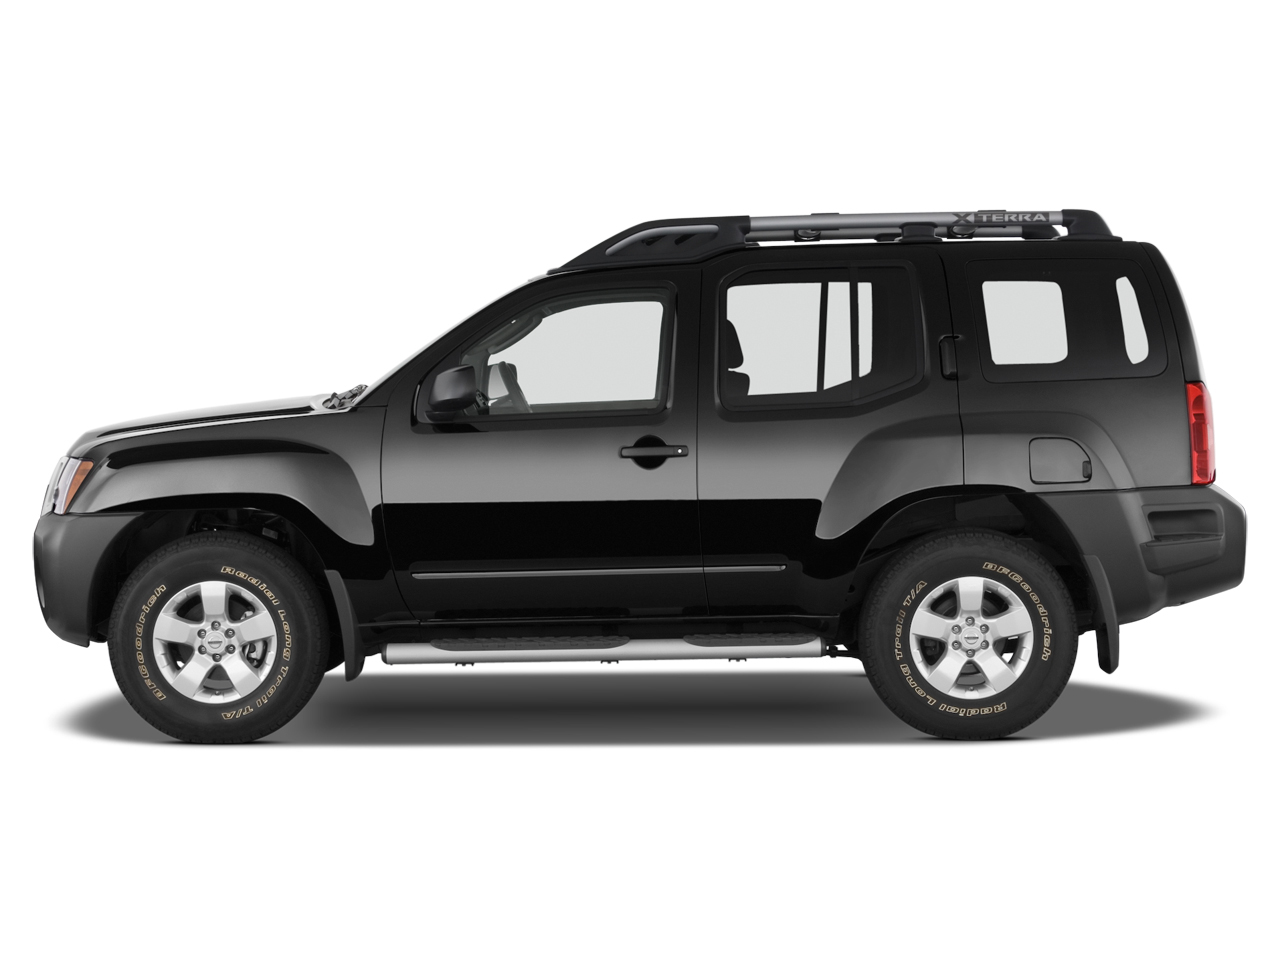 Bring Back the Amazing Nissan Xterra The SUV You Really Want